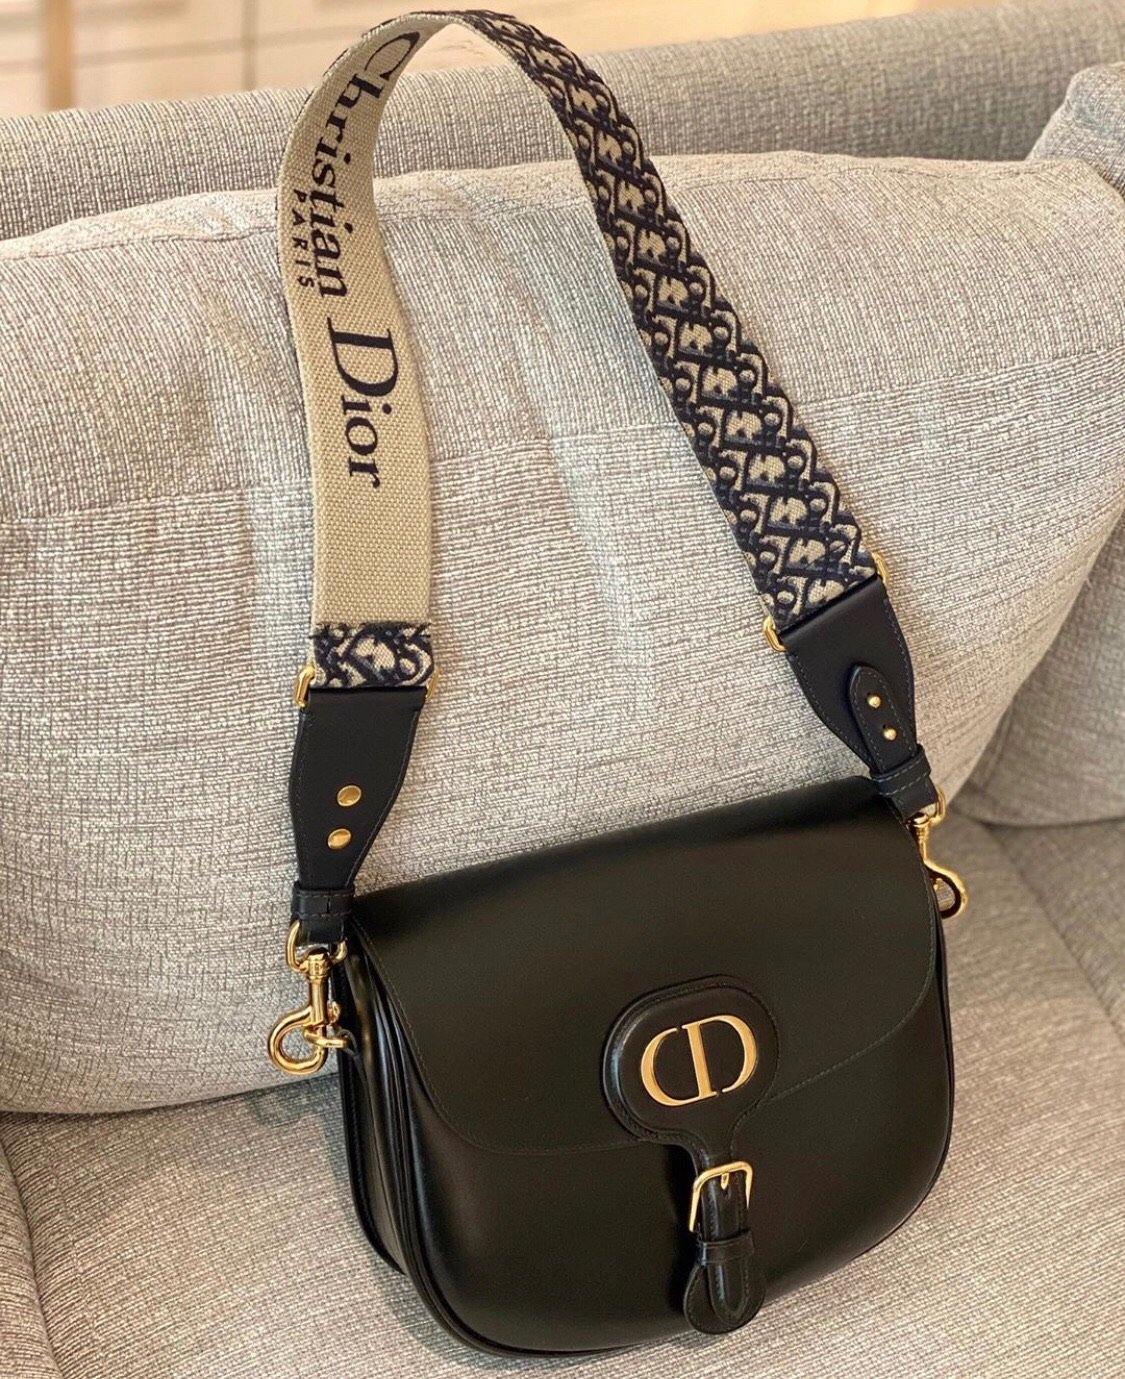 Sydney Luxe Online  Large Dior Bobby Bag in Warm Taupe Box Calfskin  Please note that the large ones comes with the Blue Dior Oblique  Embroidered Shoulder Strap winwin diorbobby sydneyluxeonline   Facebook